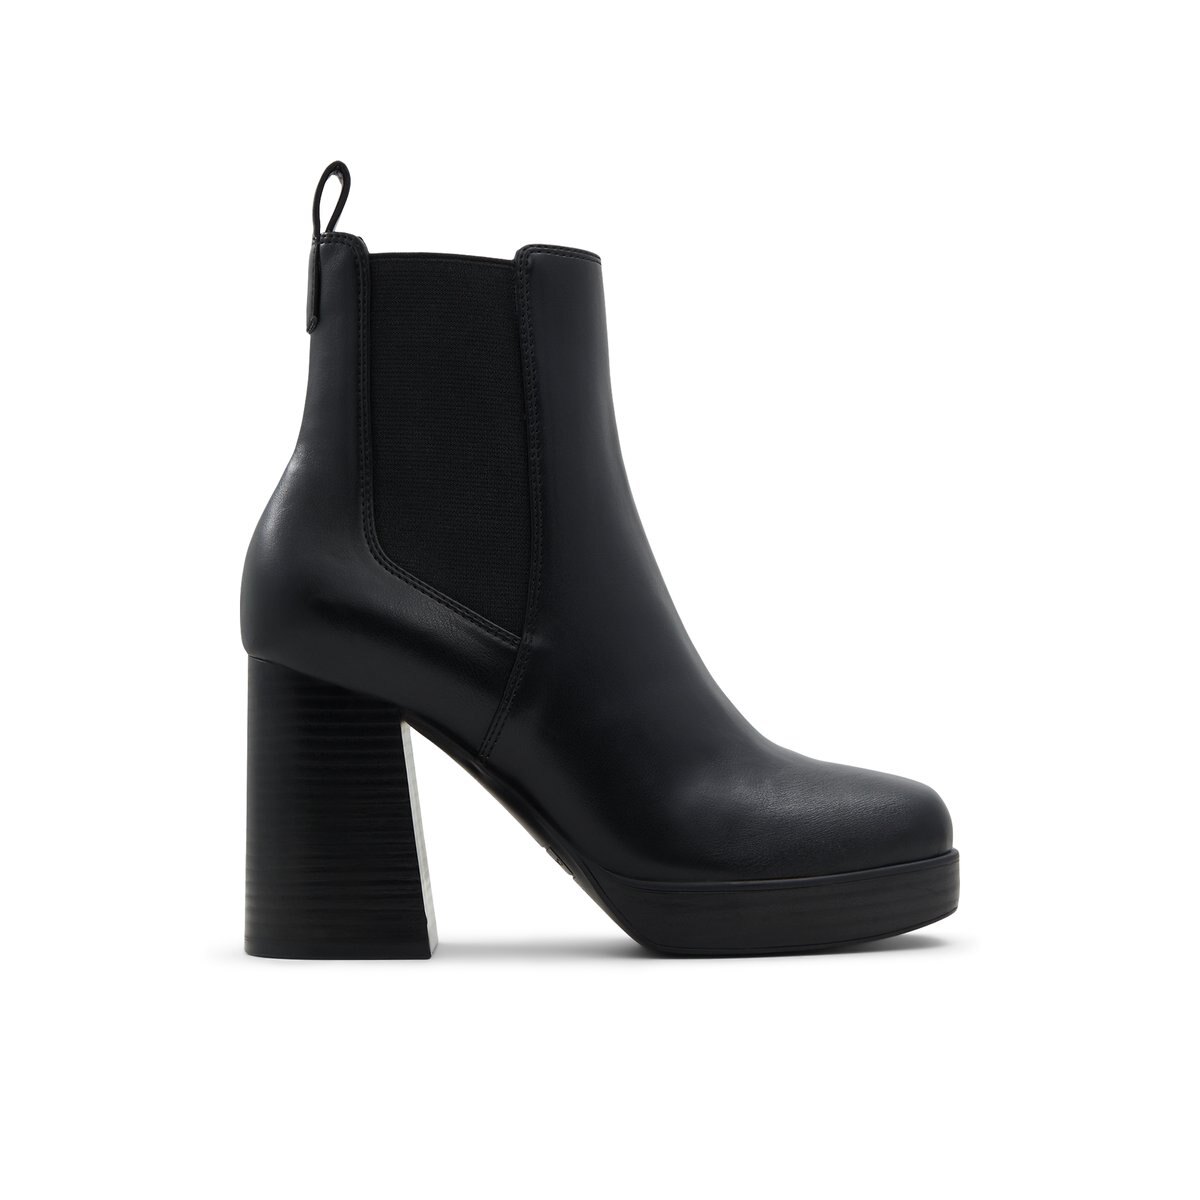 Tate Black Women's Ankle Boots | Call It Spring Canada